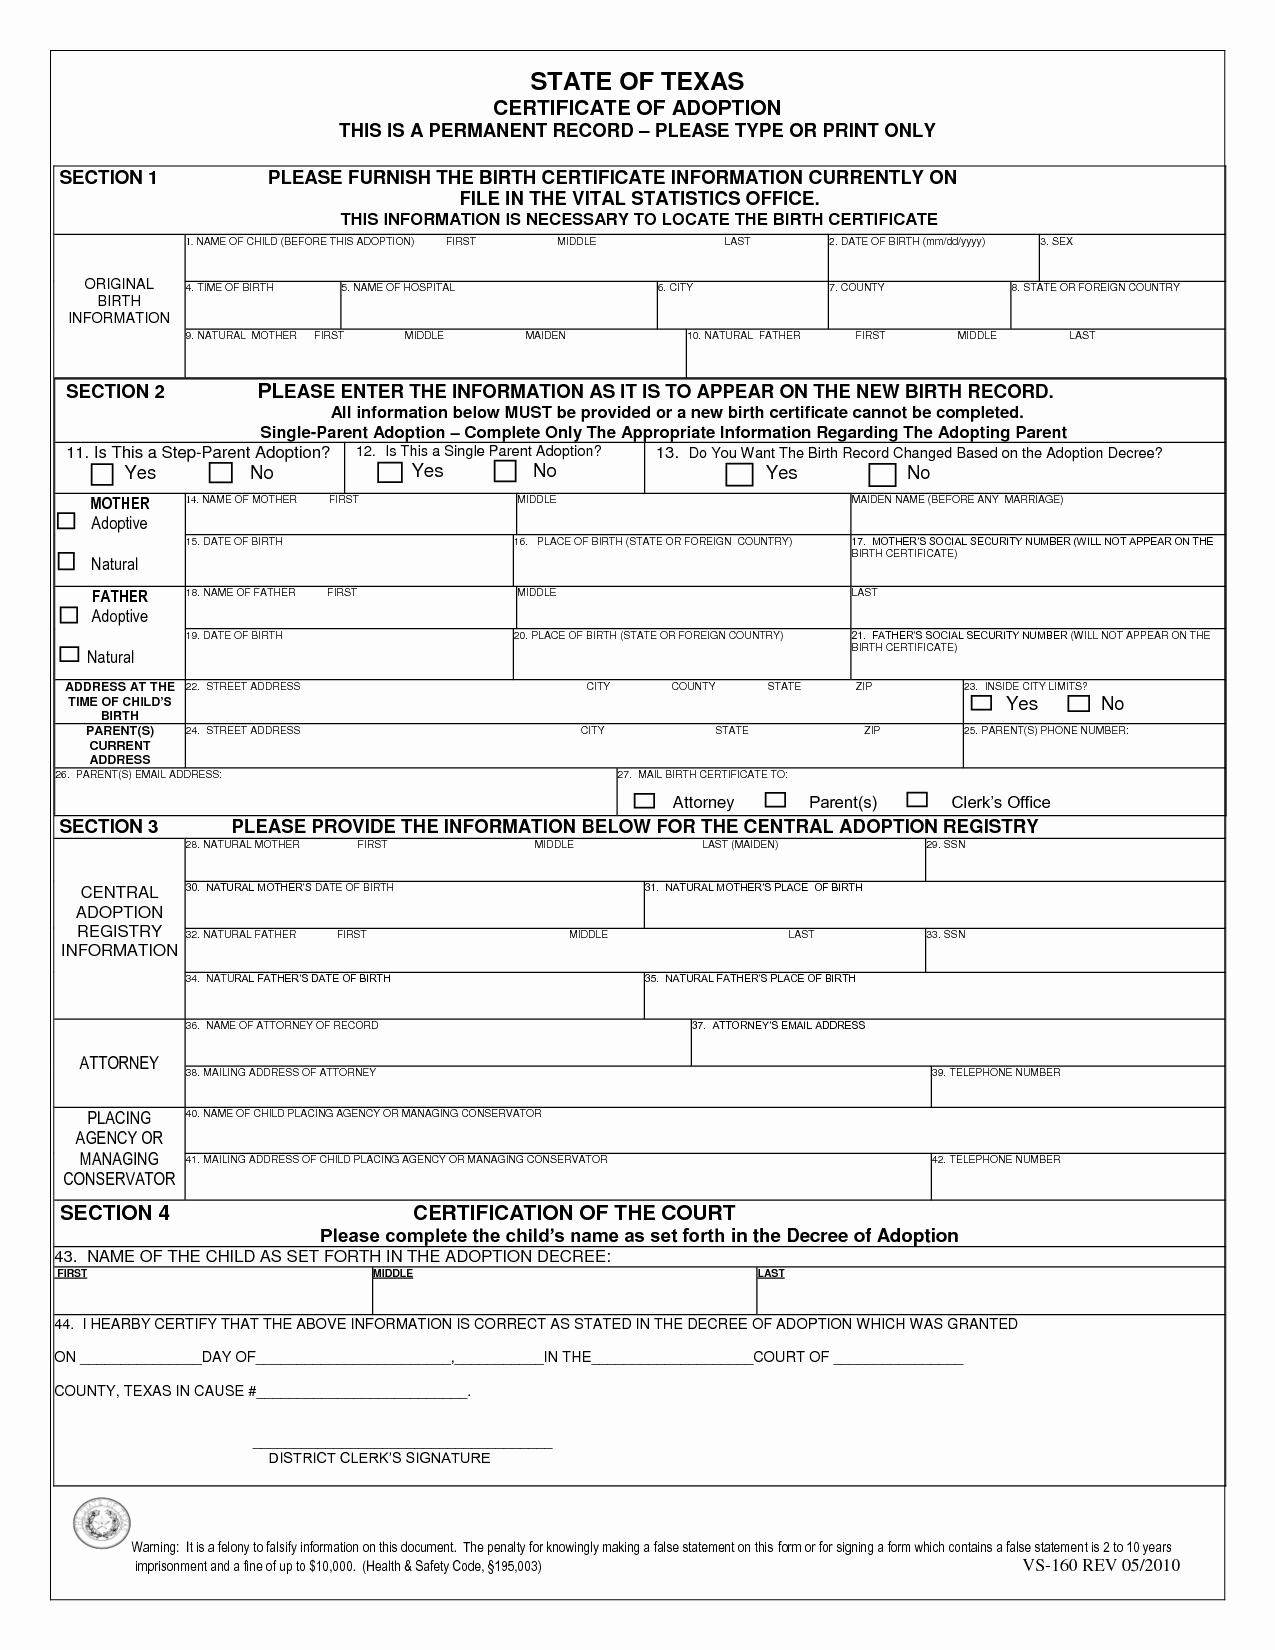 Official Birth Certificate Template Awesome 26 Of Texas Birth Certificate Blank Template